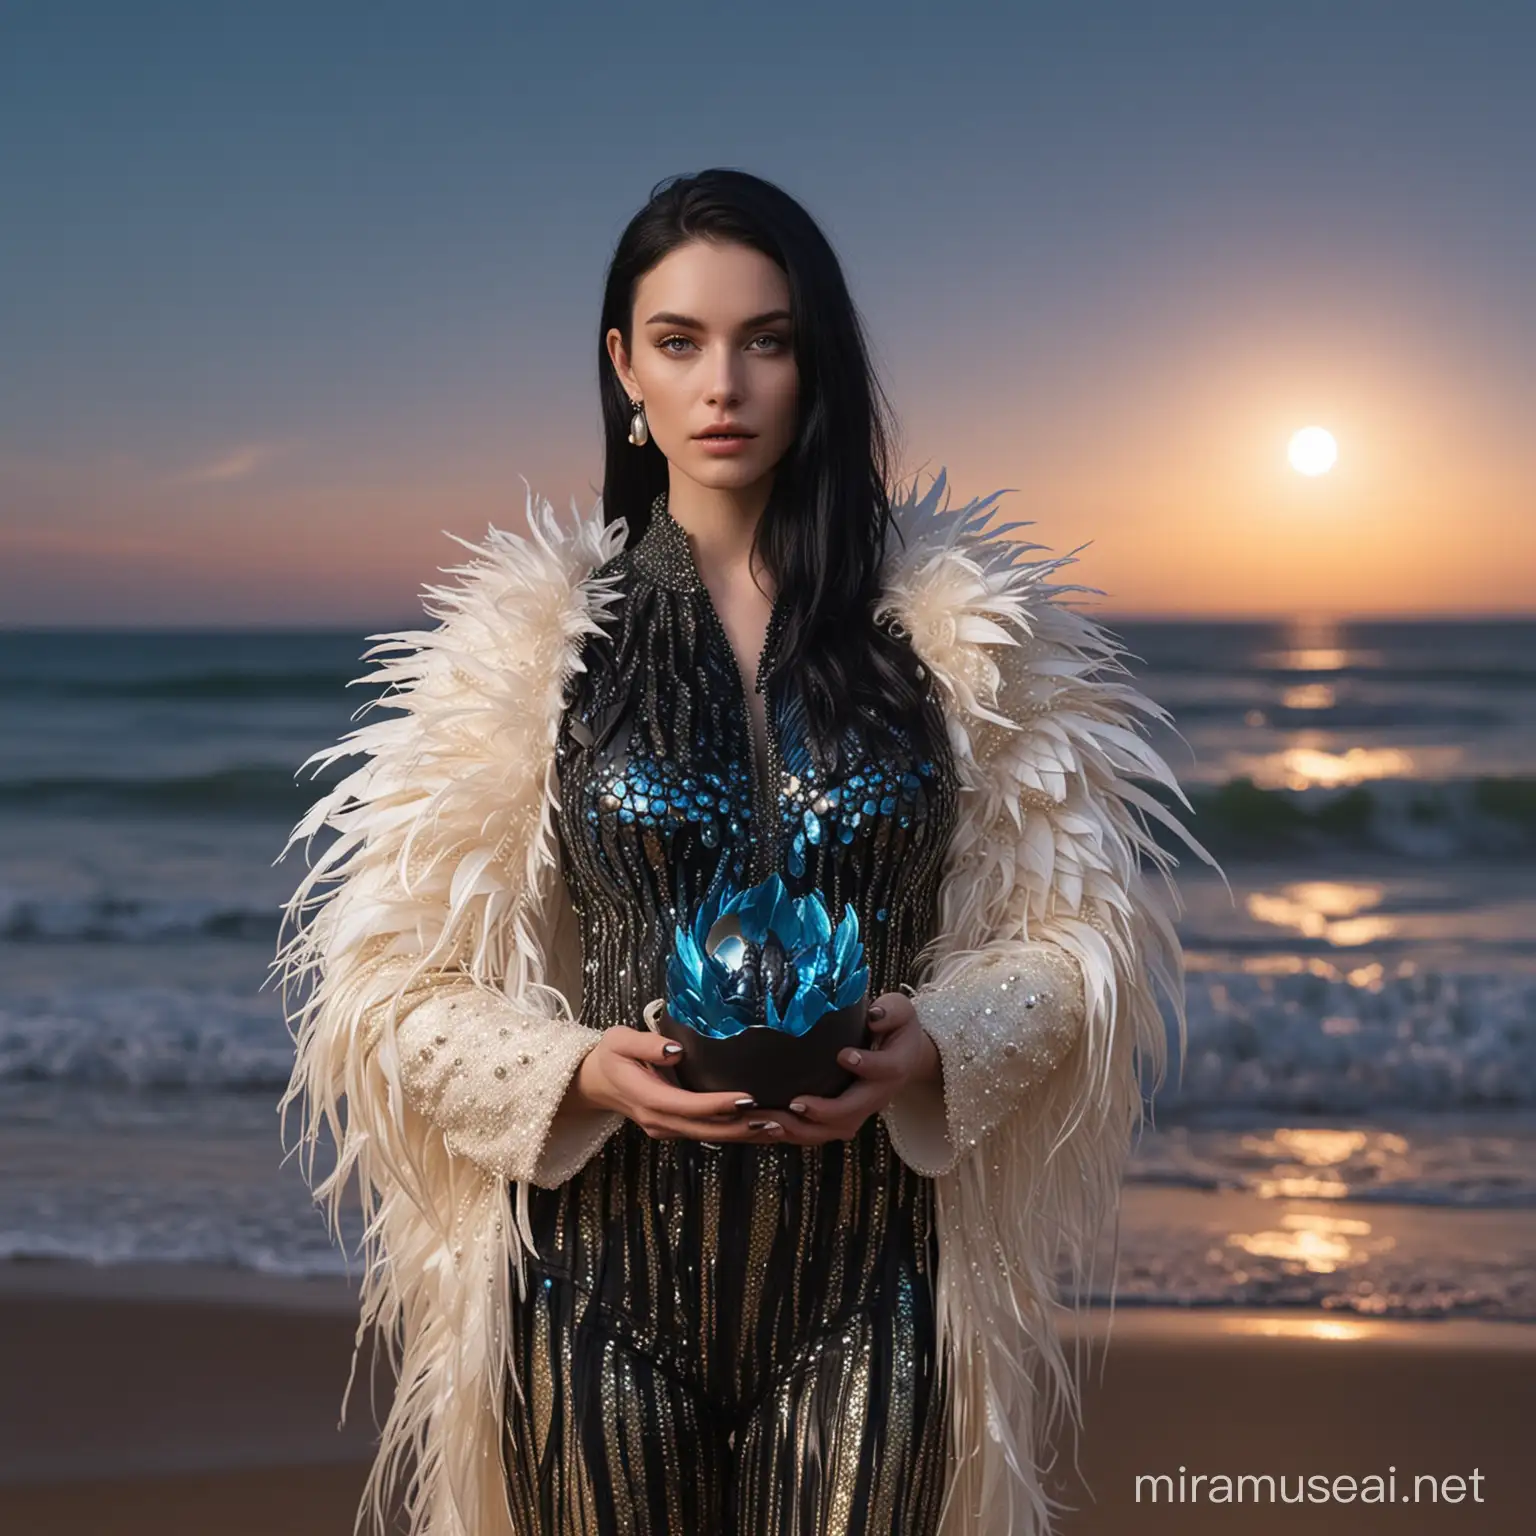 A white skinned woman model holding a metallic black blue colored tiny dragon inside a golden eggshell, pearl iridescent, wearing metallic black shiny Schiapirelli inspired couture feather jacket, silver shiny crone, extreme long black hair, wes anderson color palette, night with huge moon beach background, 35mm photography